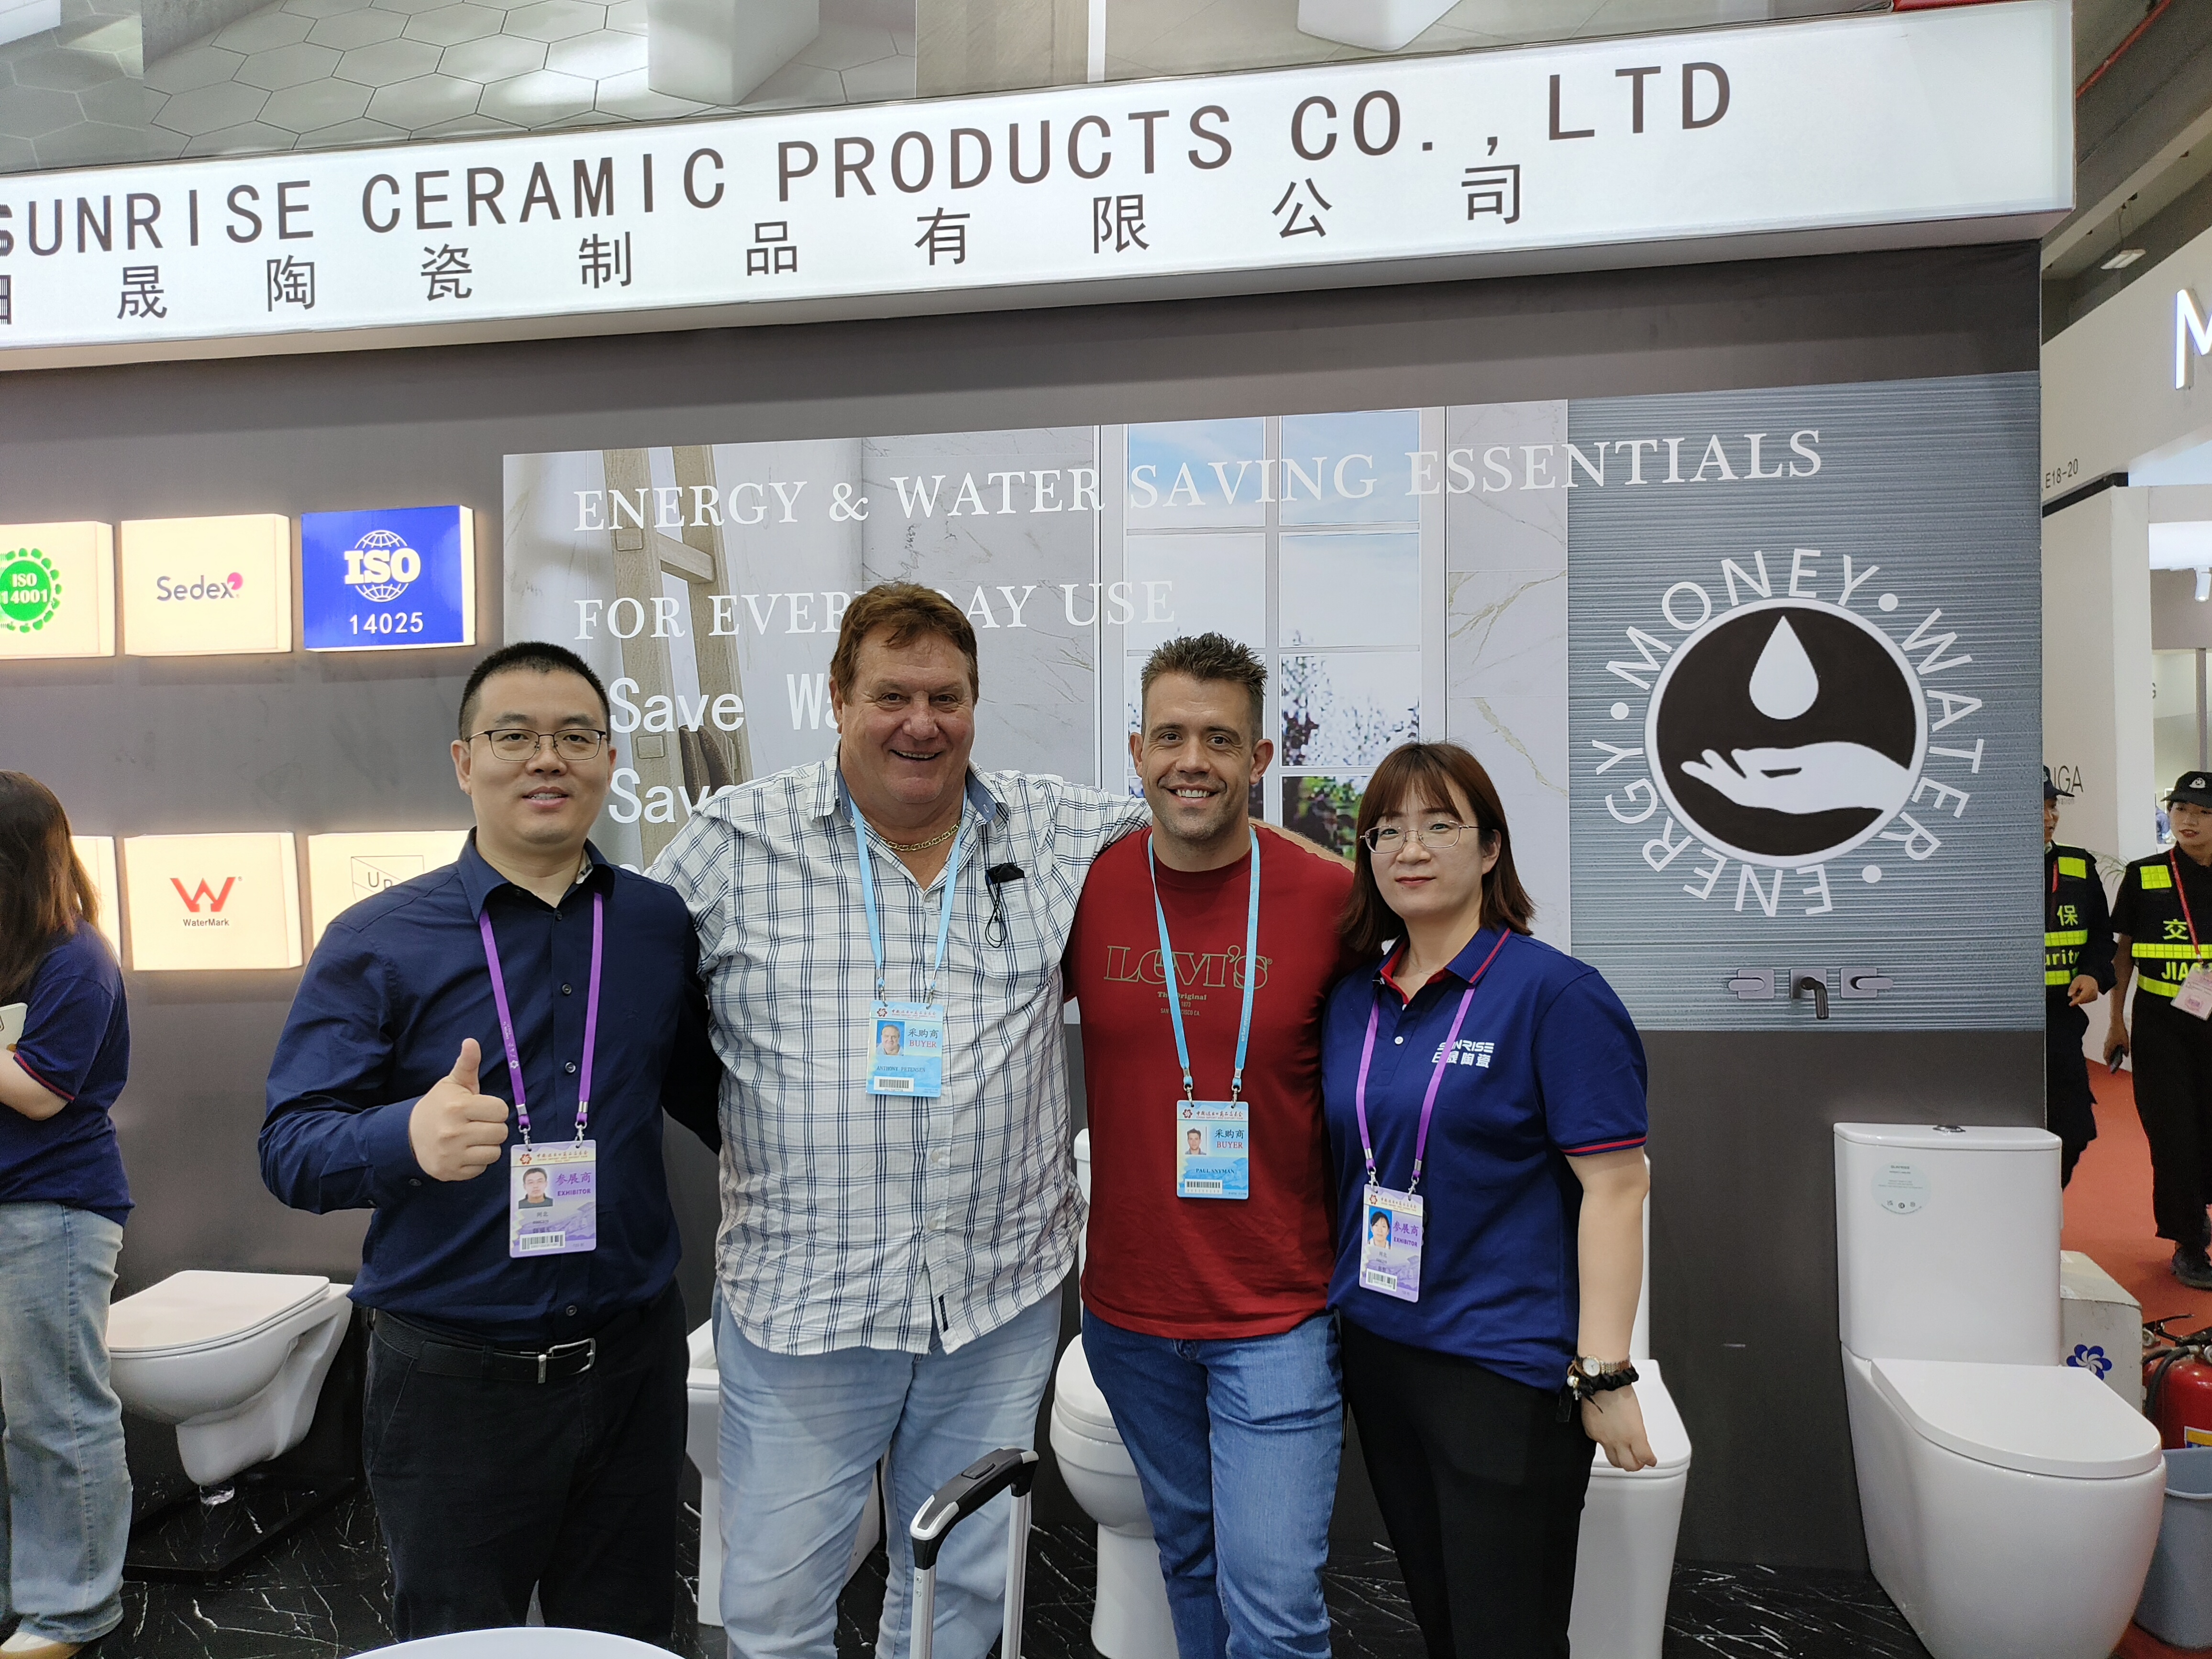 Working together at the Canton Fair: opening up new business opportunities!